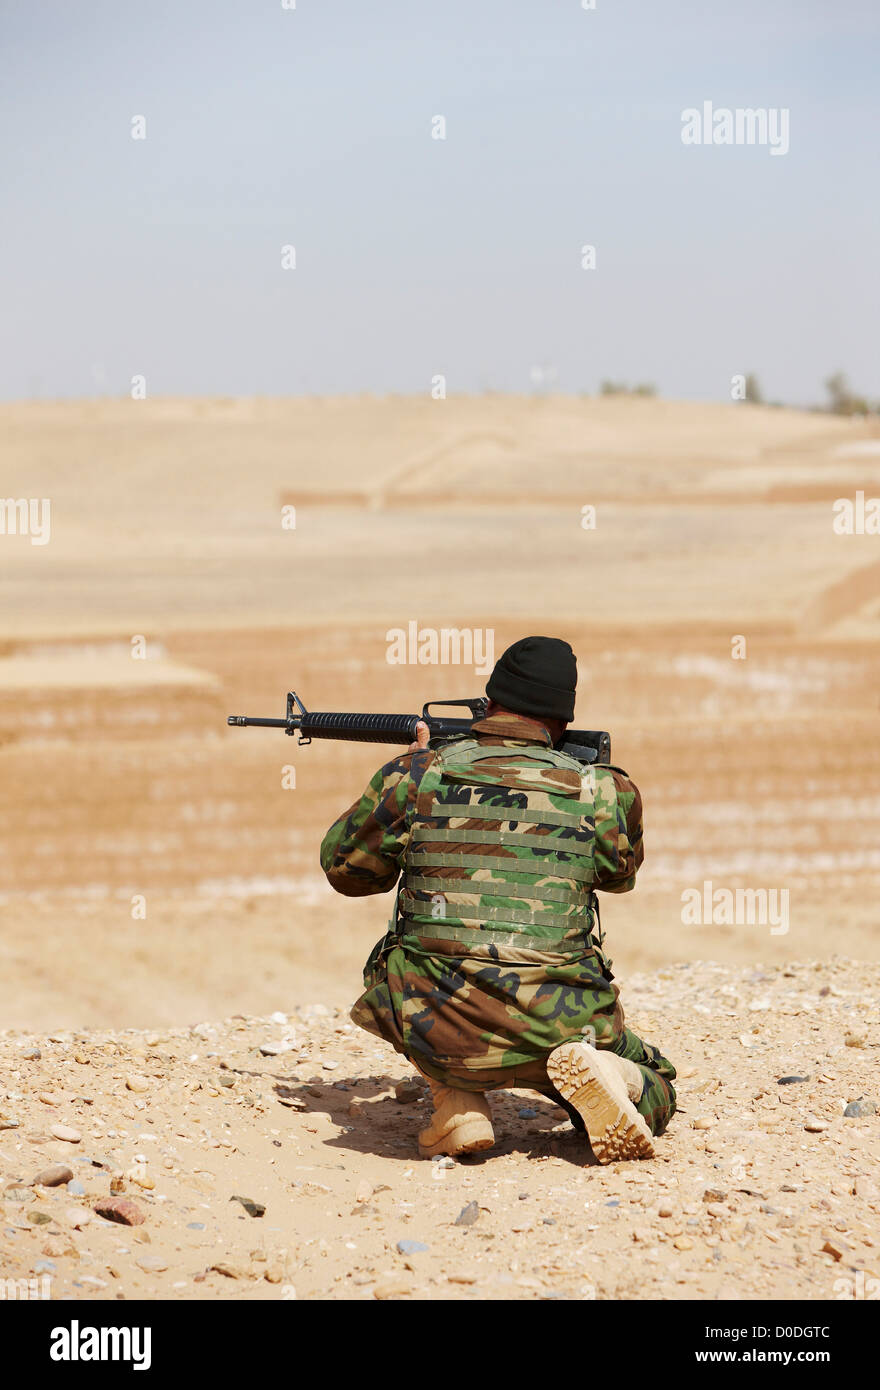 Afghan National Army soldier aims an M16 rifle during a combat operation in Afghanistan's Helmand Province Stock Photo